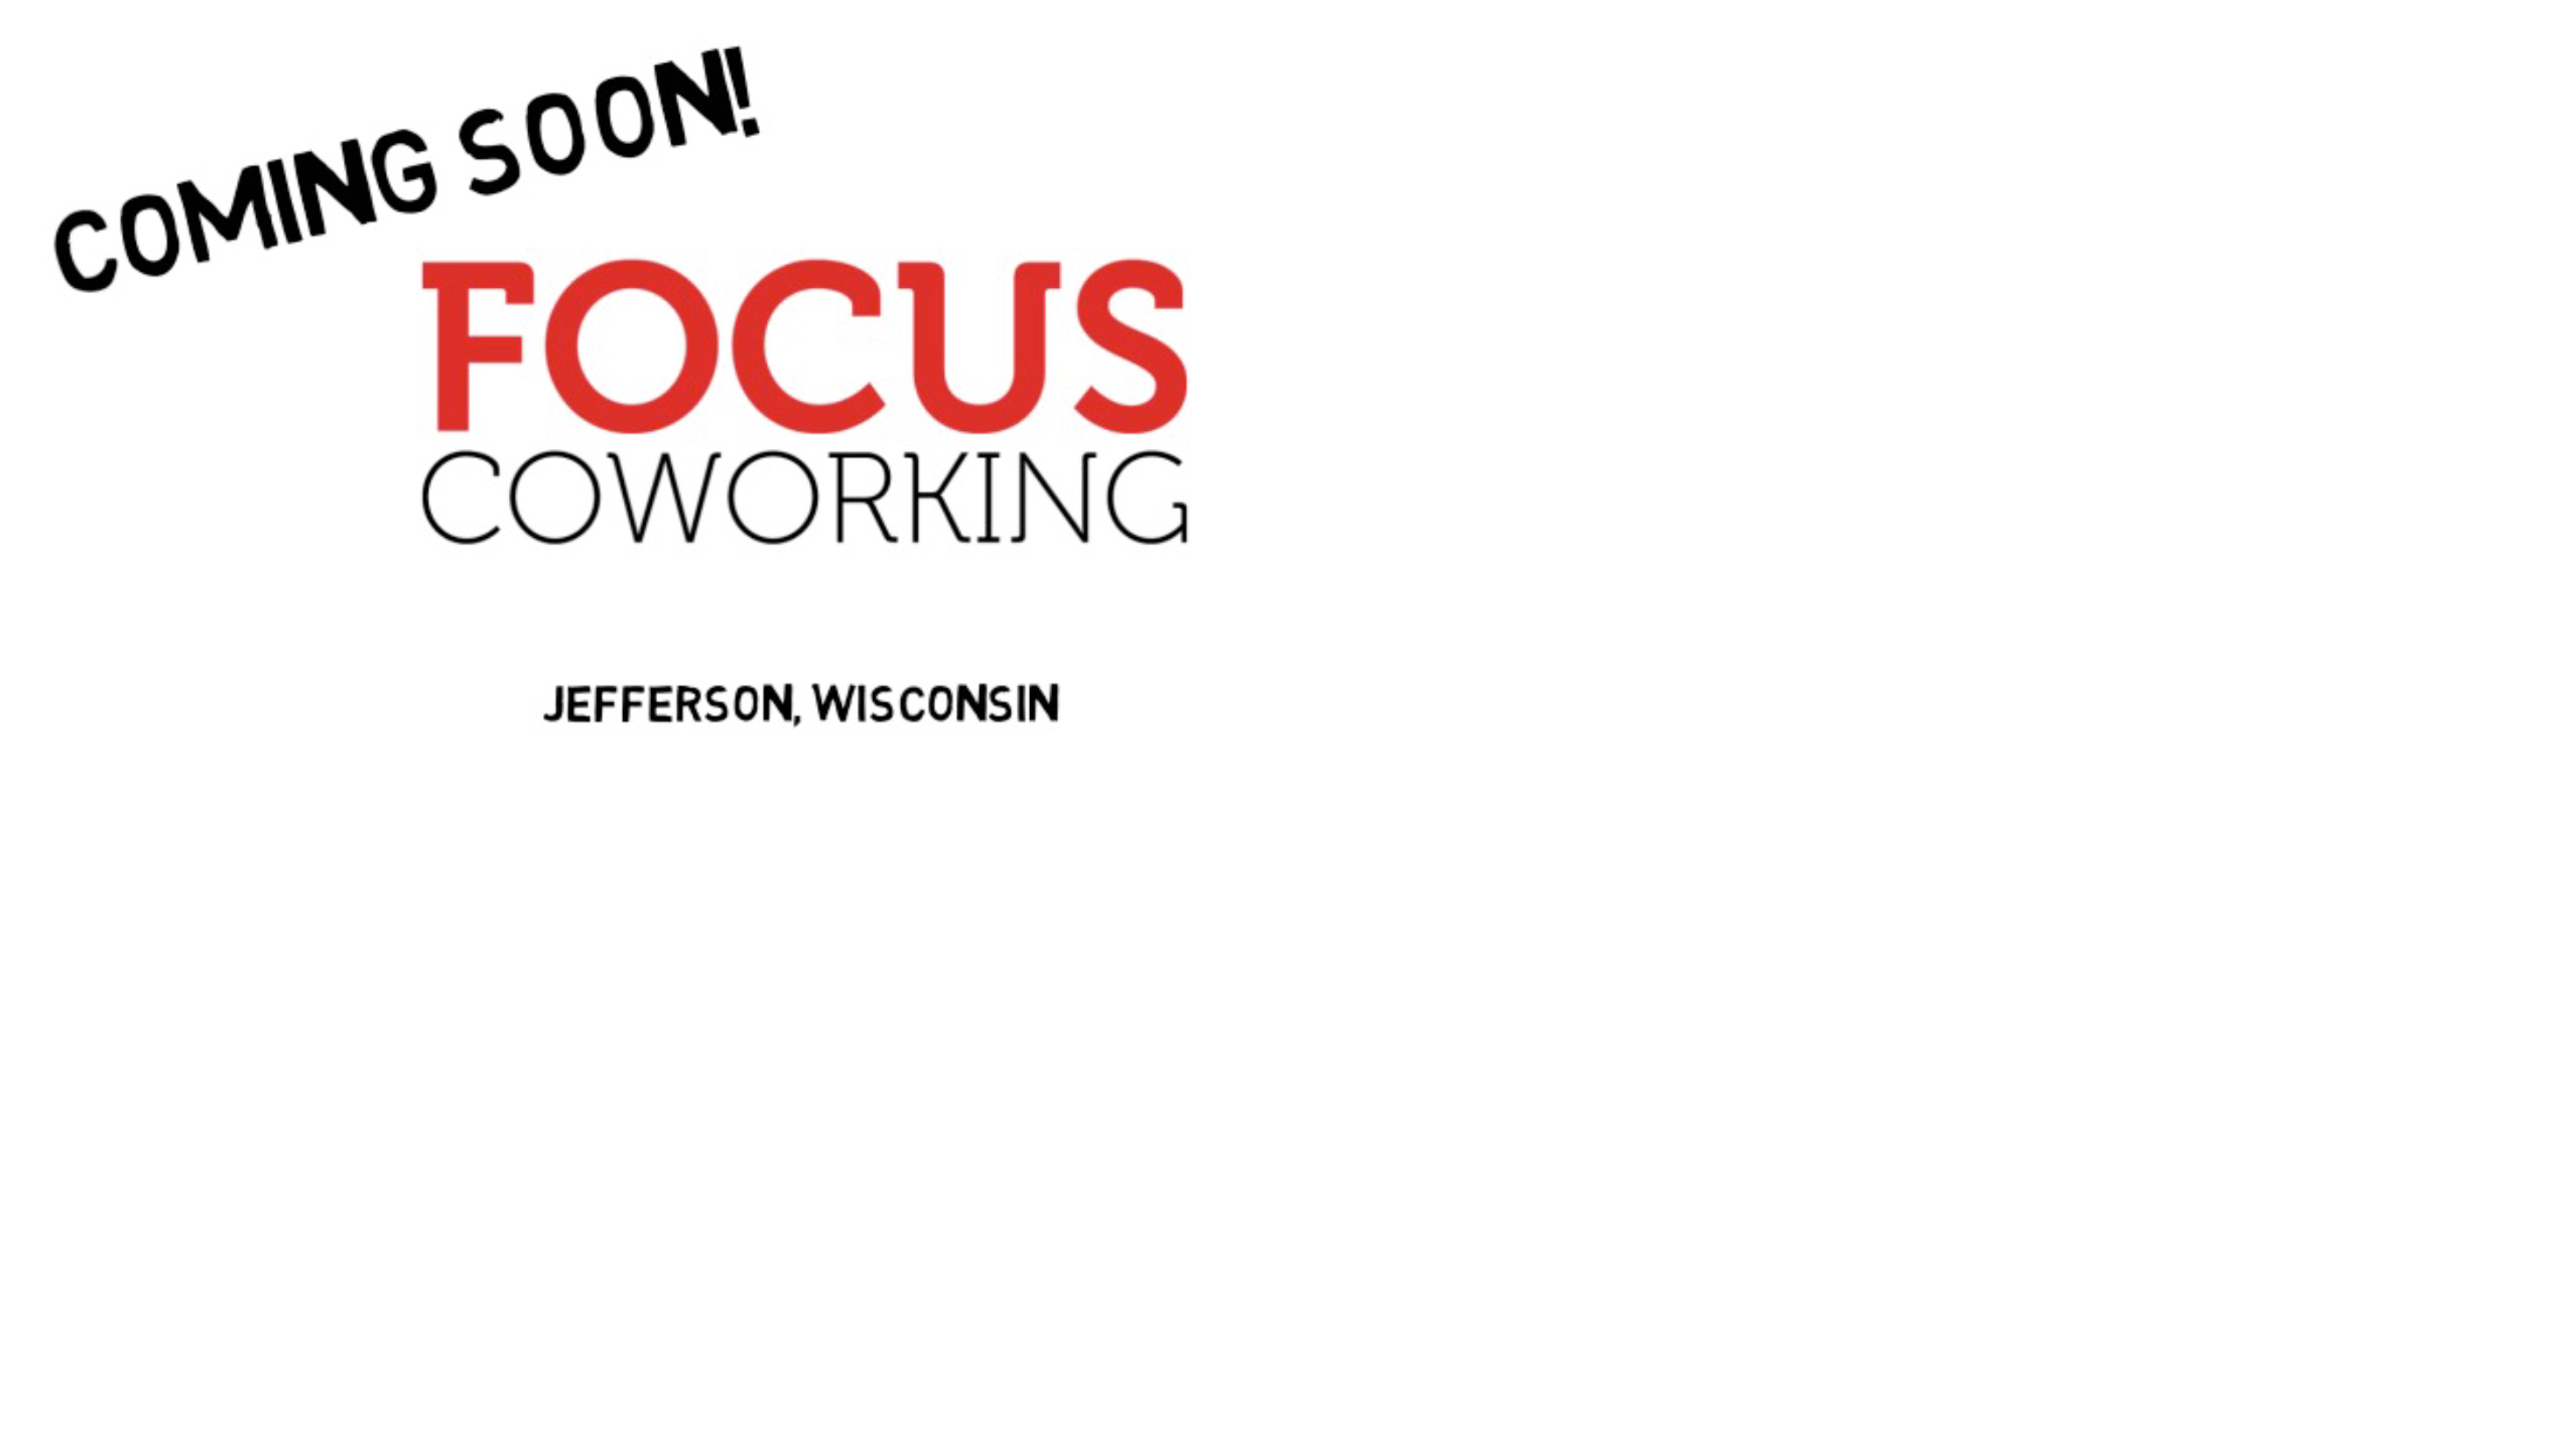 Focus Coworking Coming Soon To Jefferson, WI